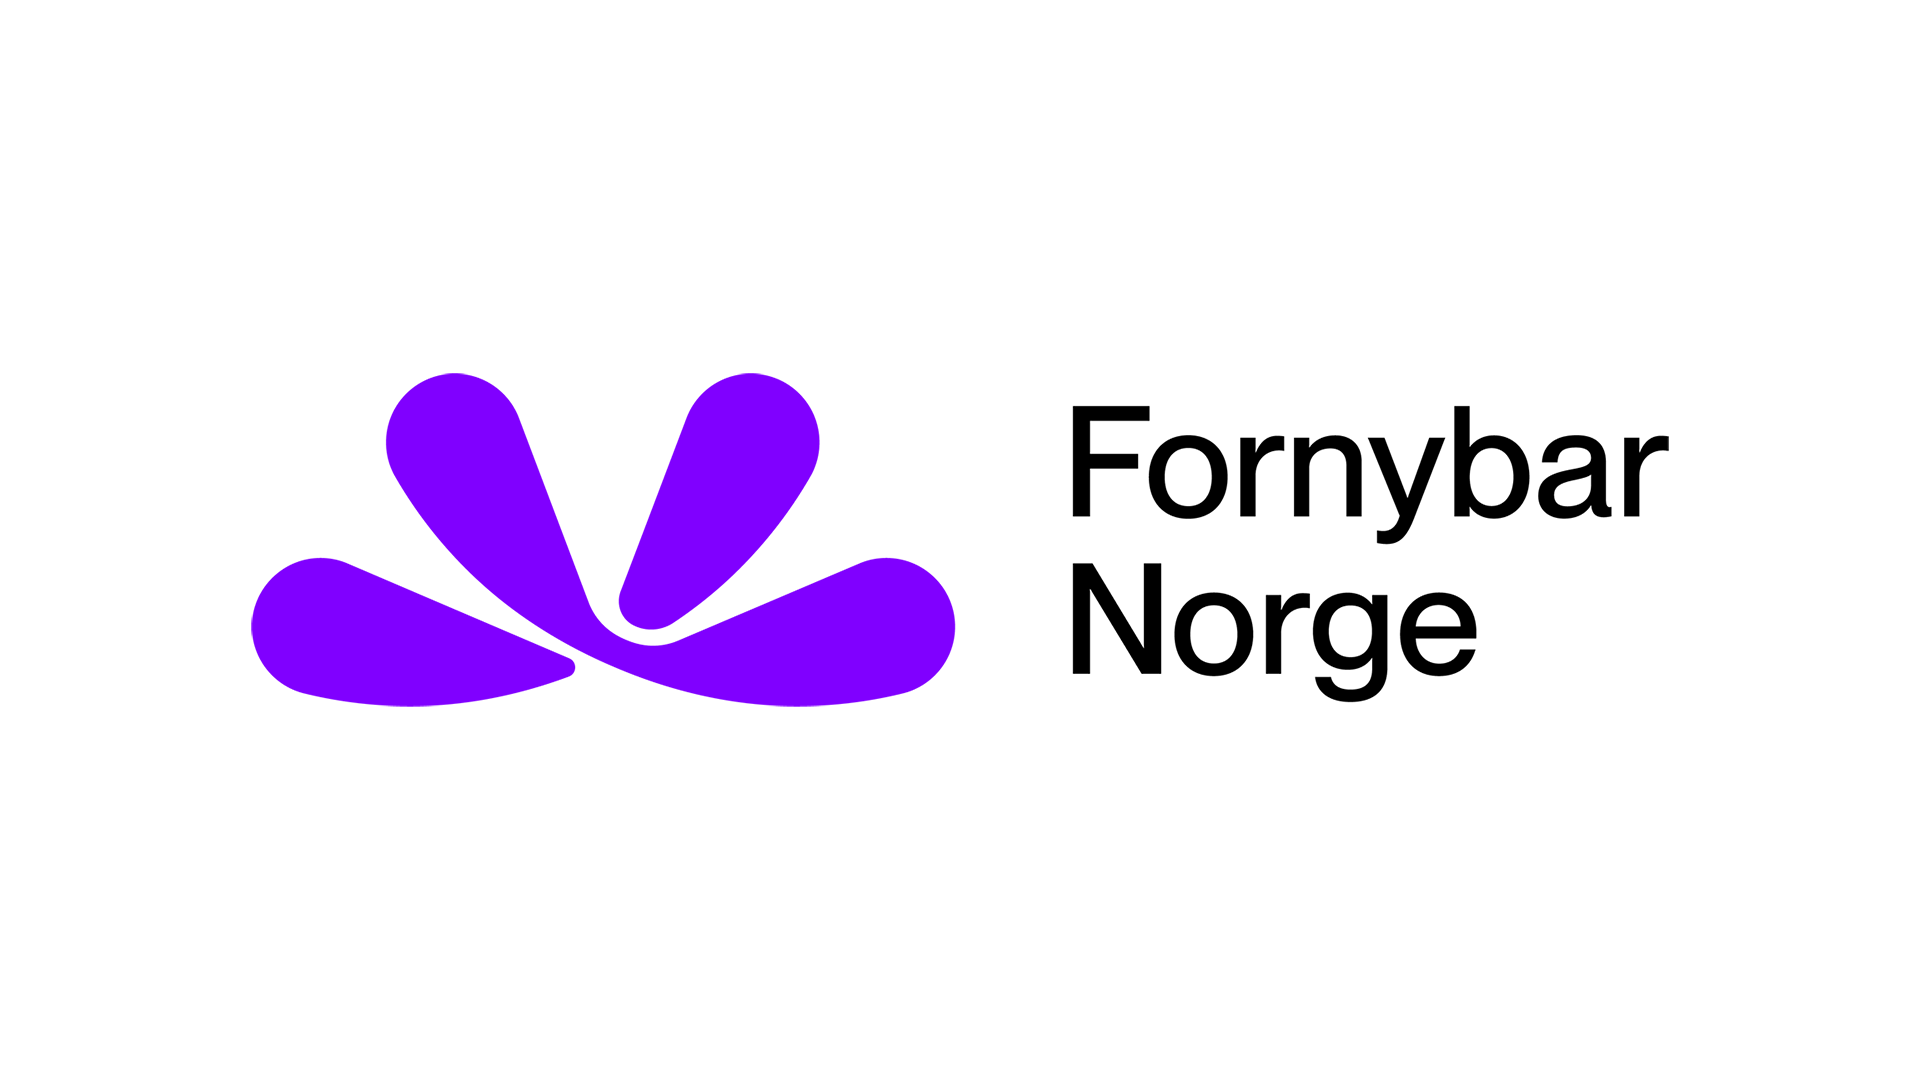 1920x1080 Fornybar_Norge_Hovedlogo_Farge_RGB-1